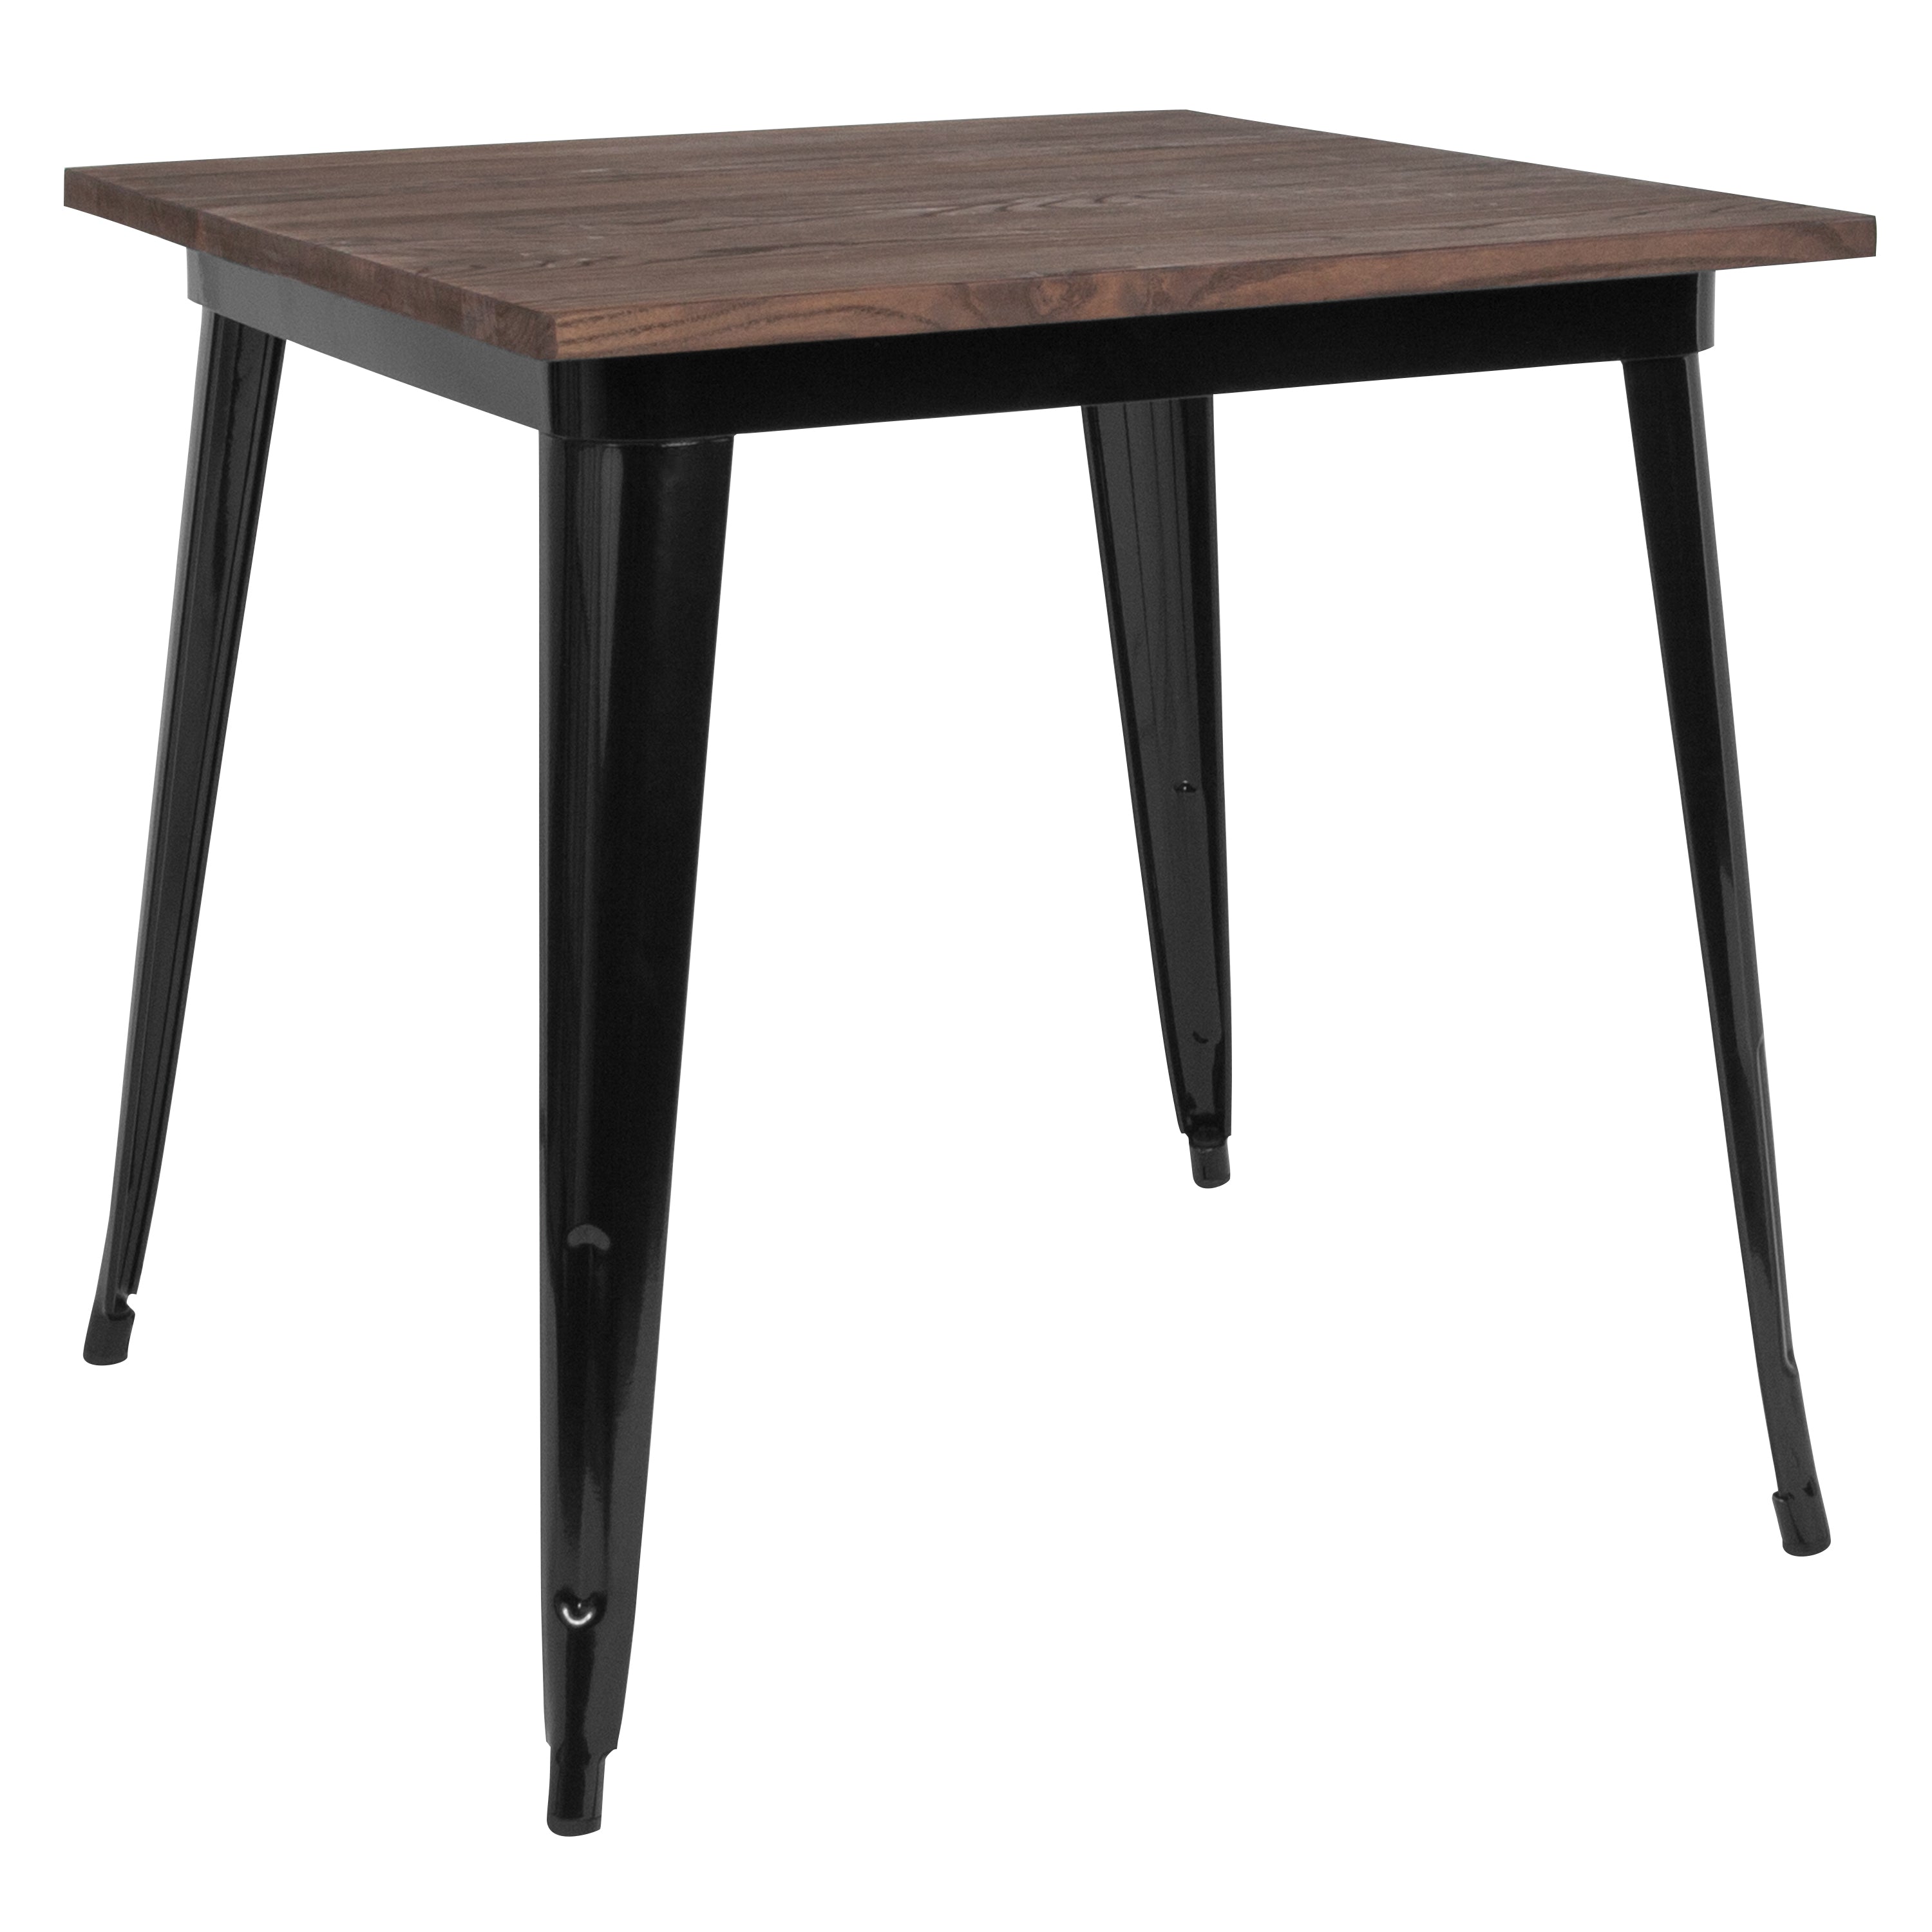 31.5" Square Metal Indoor Table with Rustic Wood Top-Metal/ Colorful Restaurant Table-Flash Furniture-Wall2Wall Furnishings